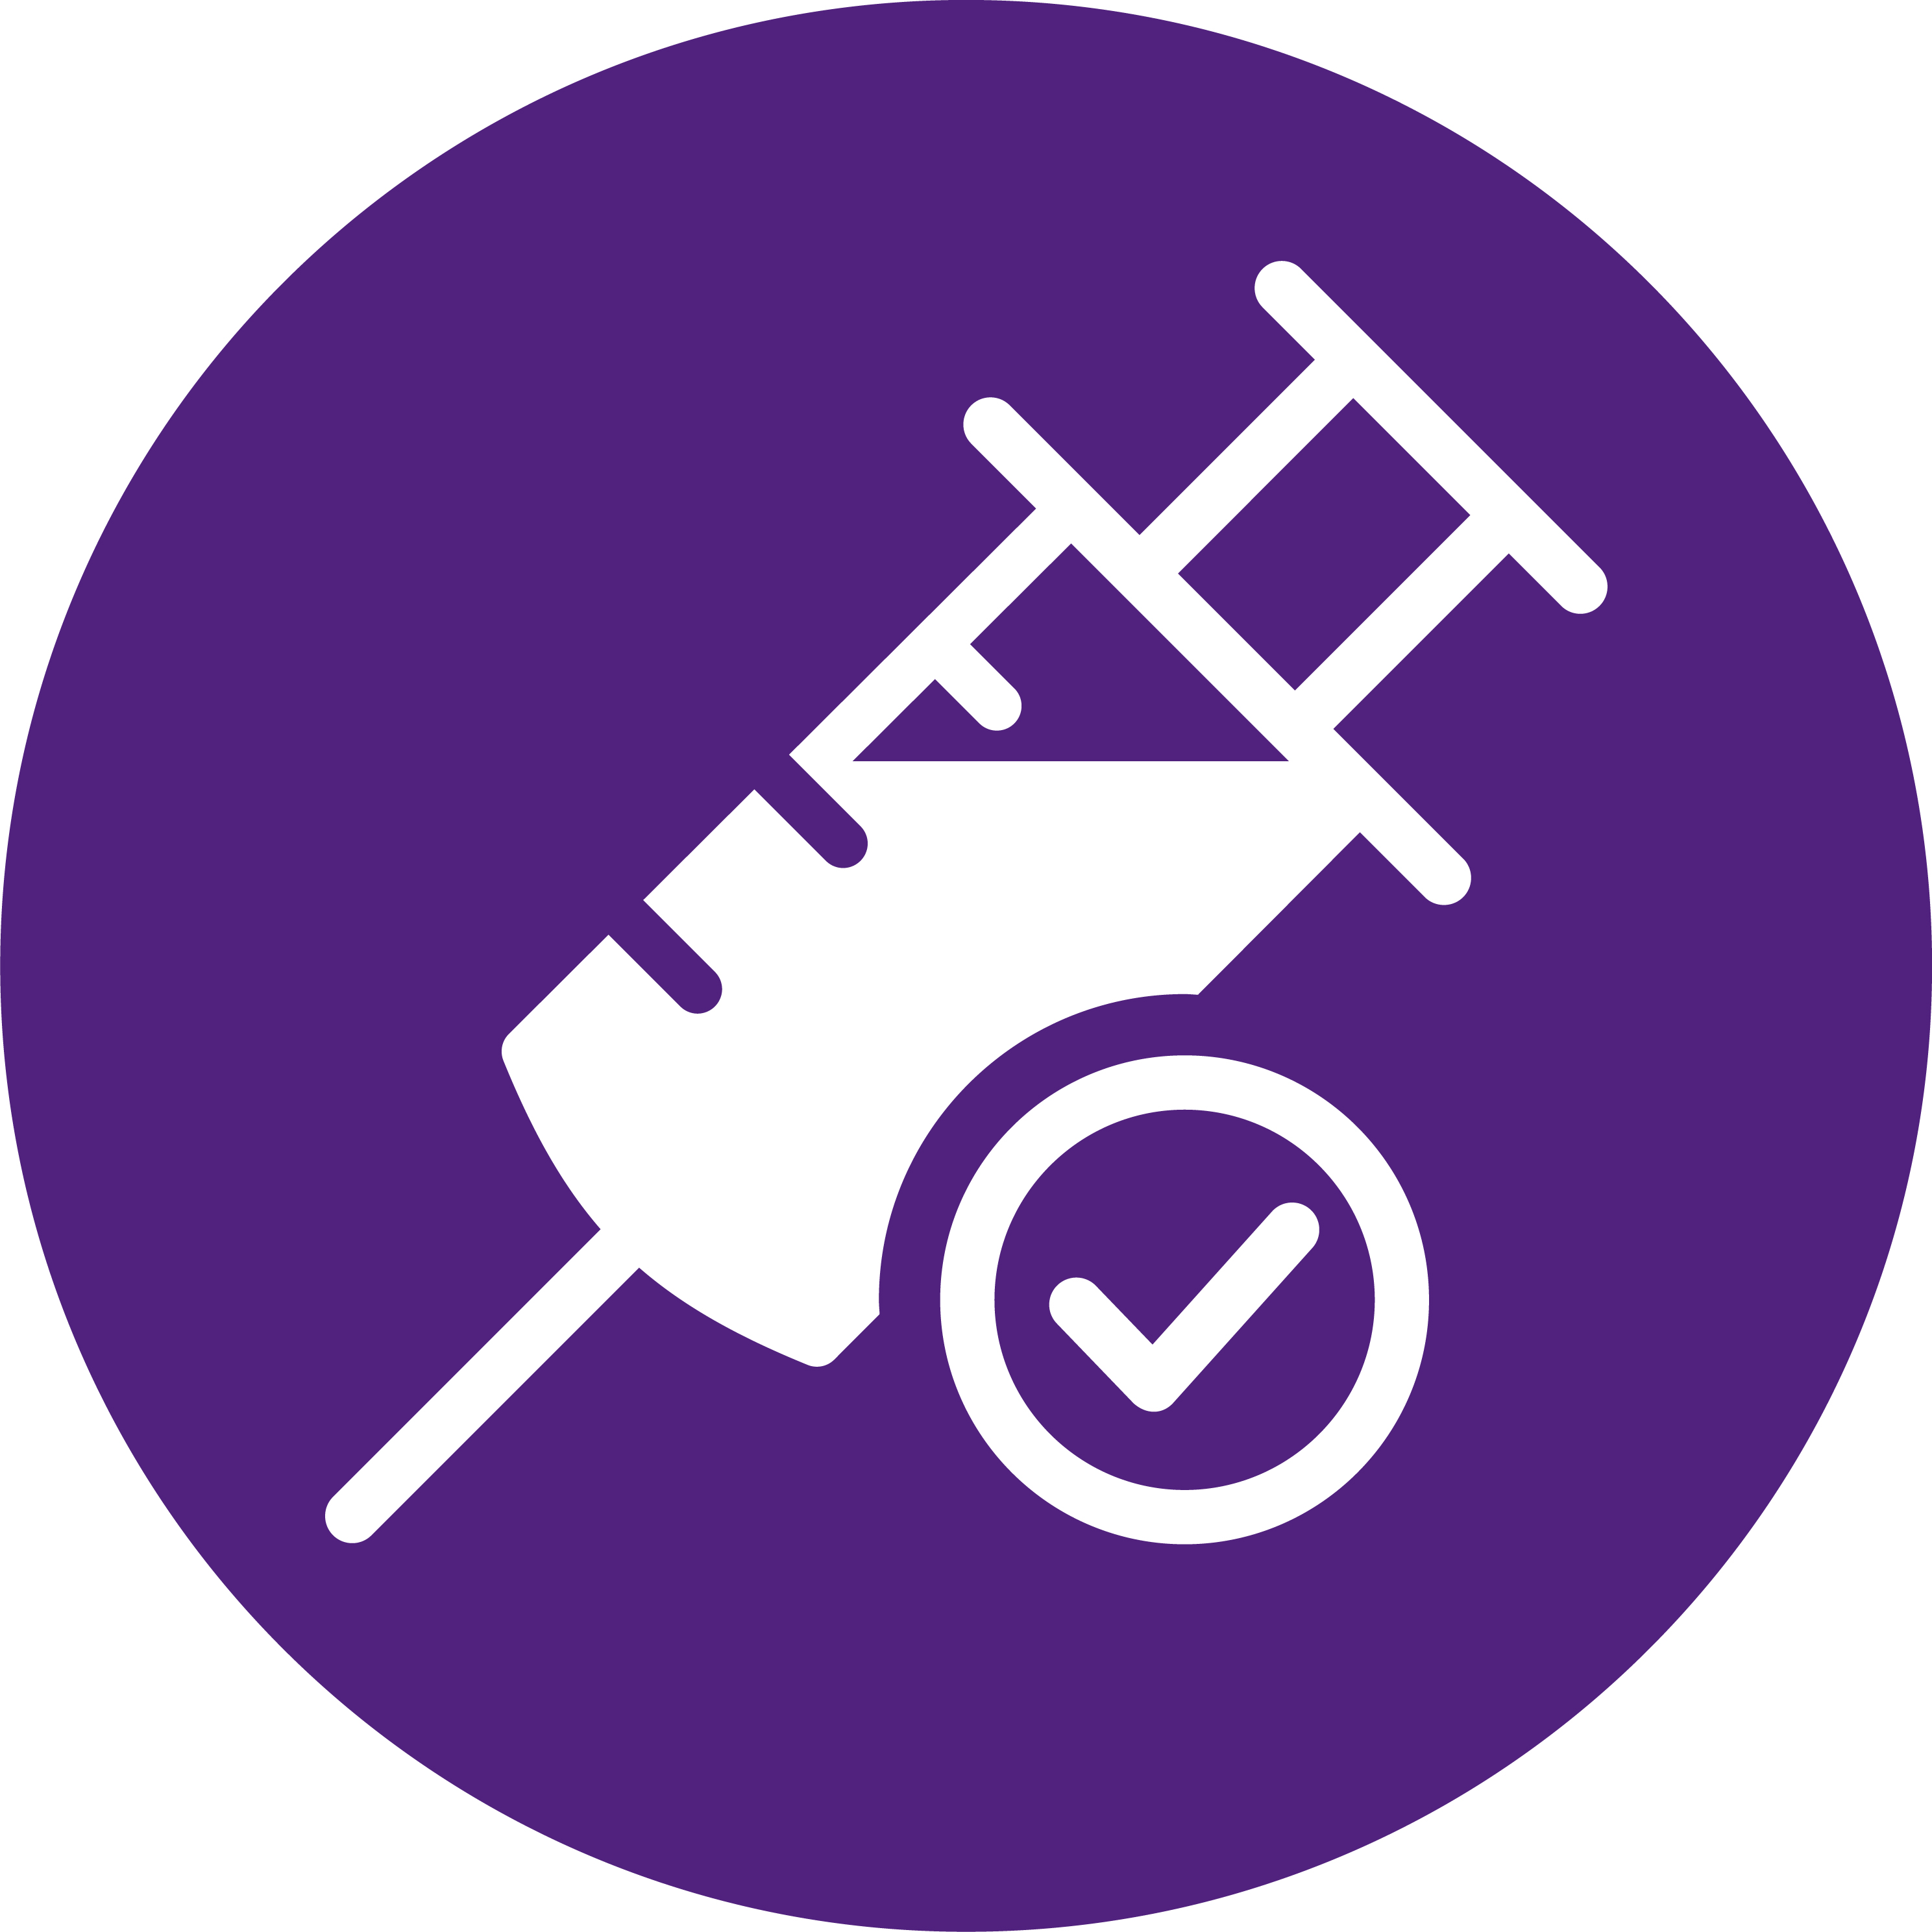 Vaccination icon - syringe and checkmark on purple background